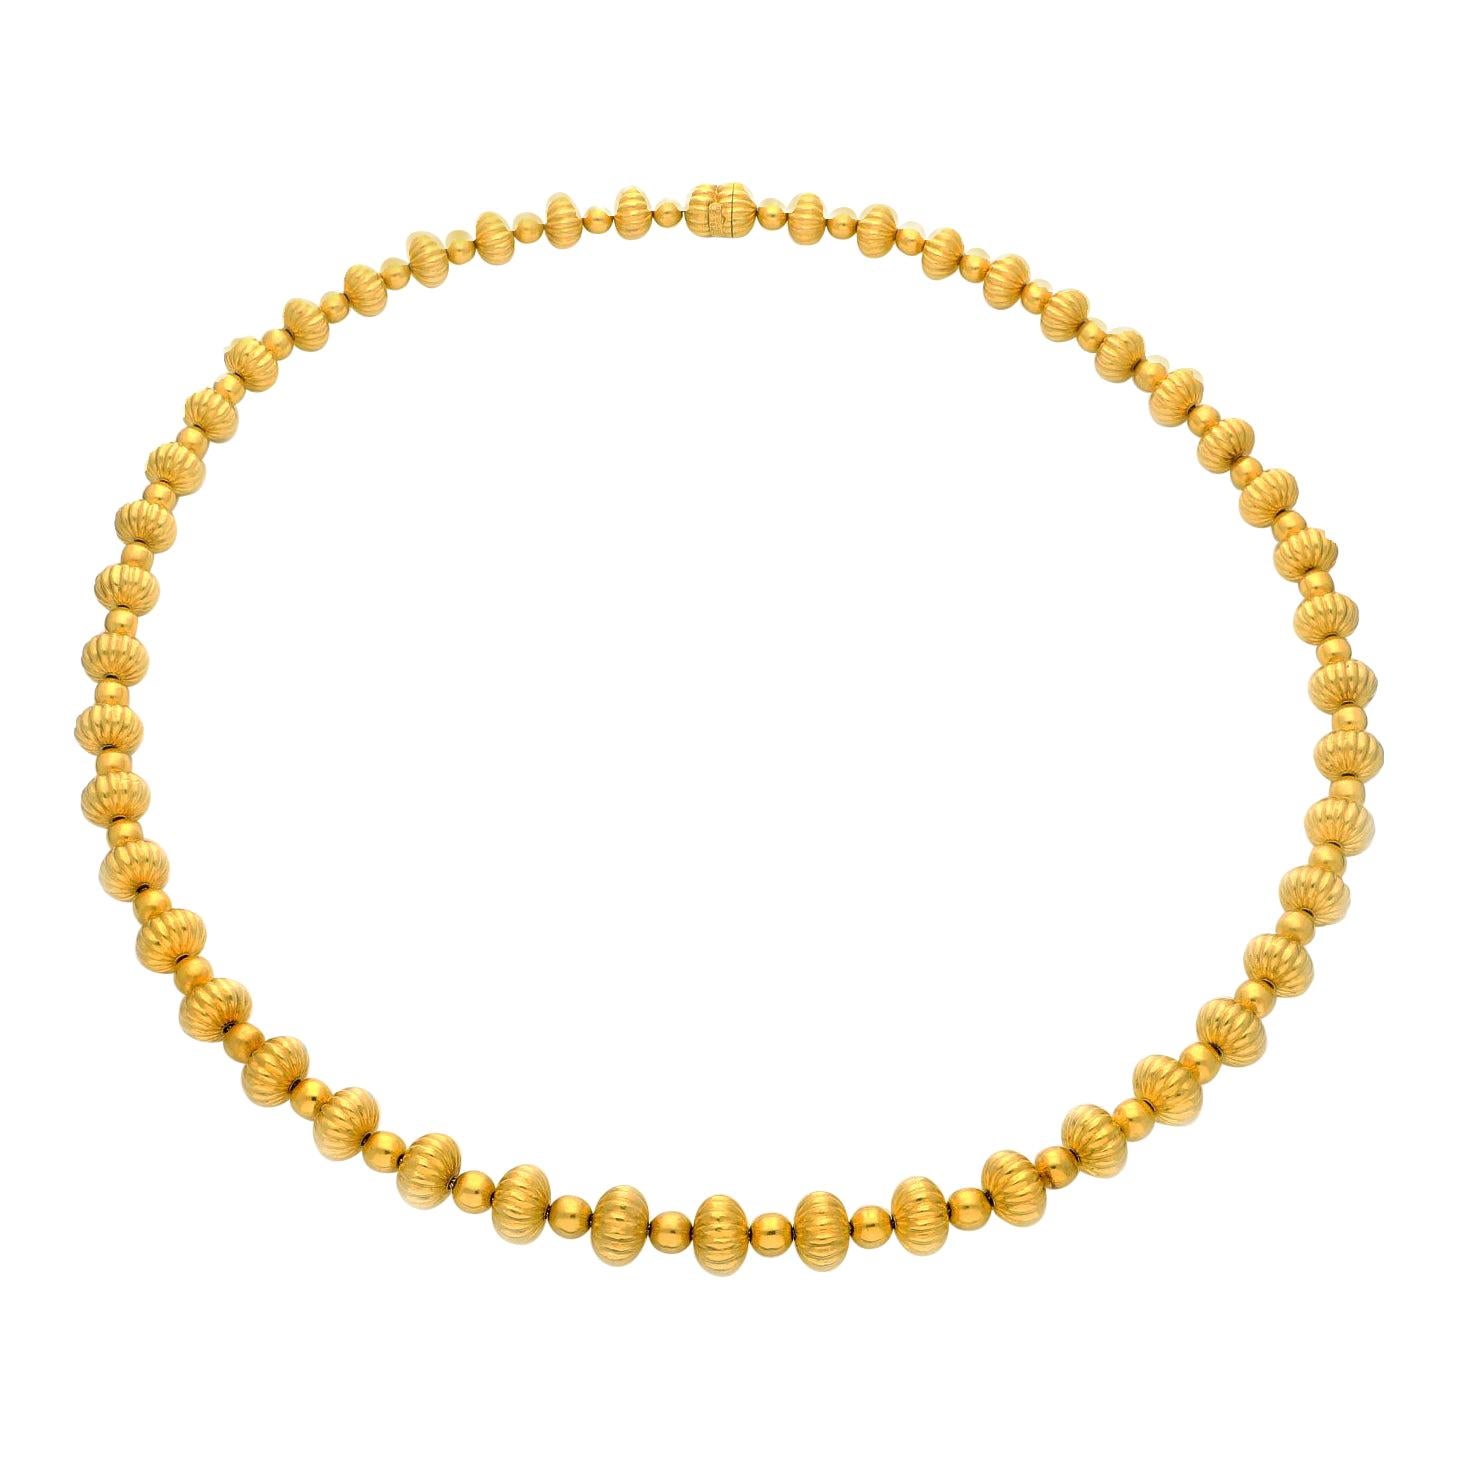 Ilias Lalaounis Spherical and Fluted Bead Necklace, circa 1970s